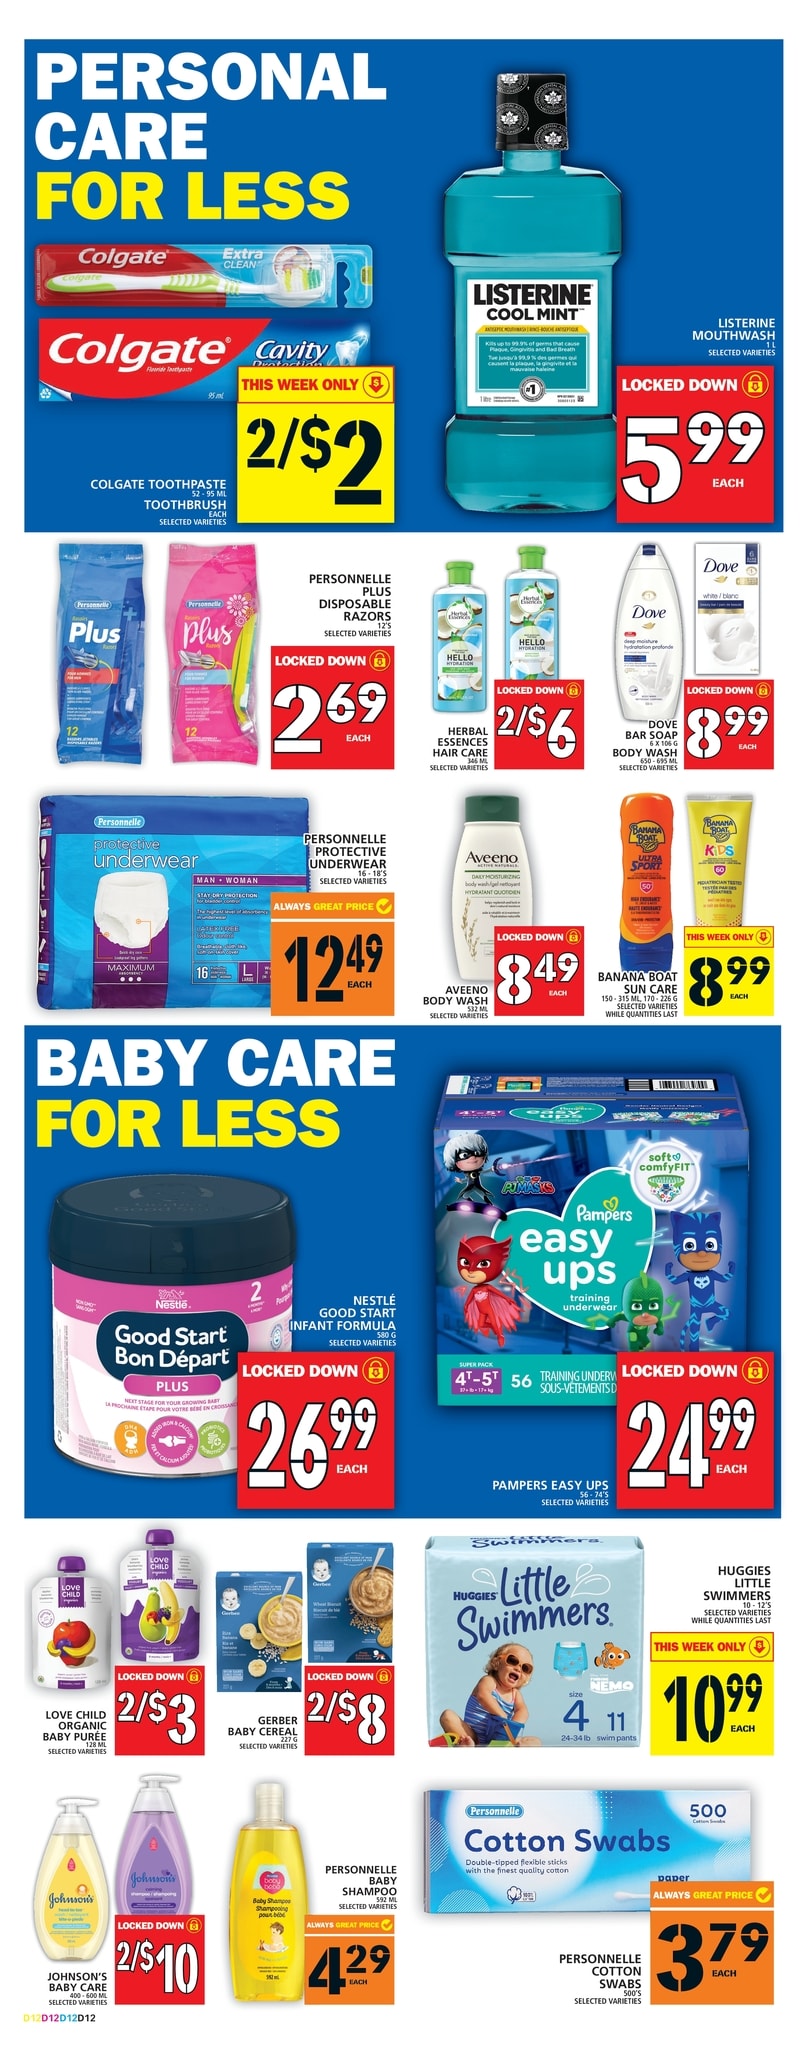 Food Basics - Weekly Flyer Specials - Page 15